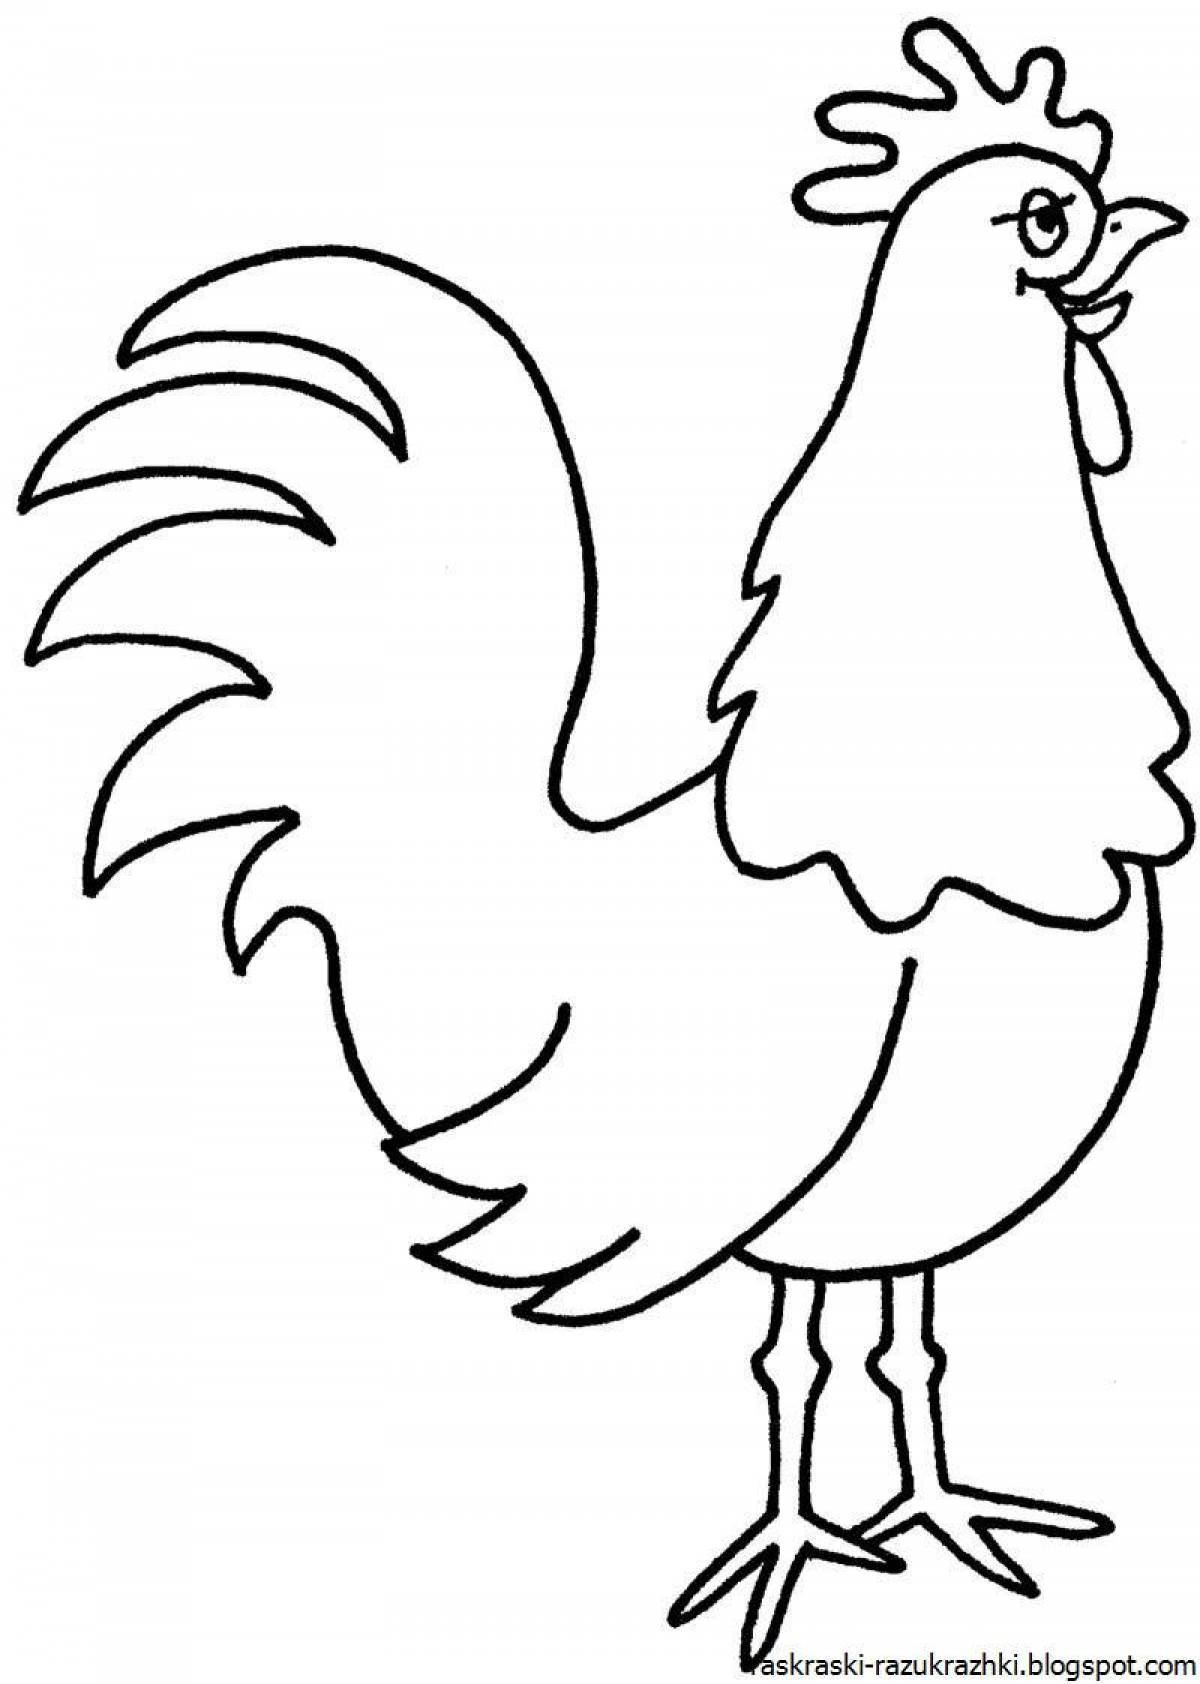 Dynamic rooster coloring page